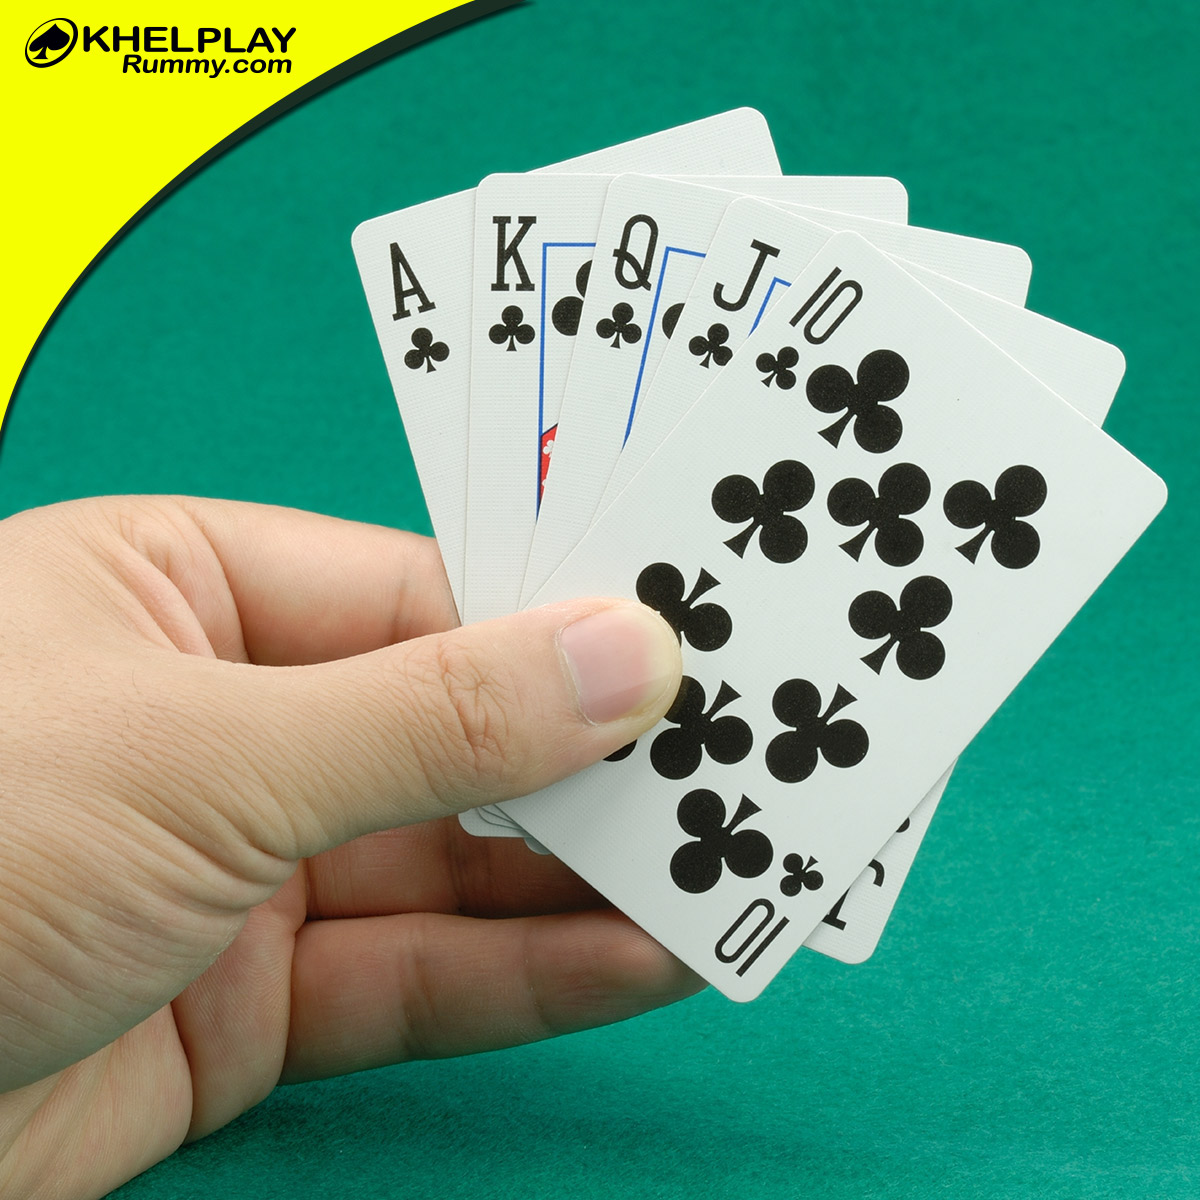 Make Lockdown Interesting with These Unique Ways of Enjoying Rummy